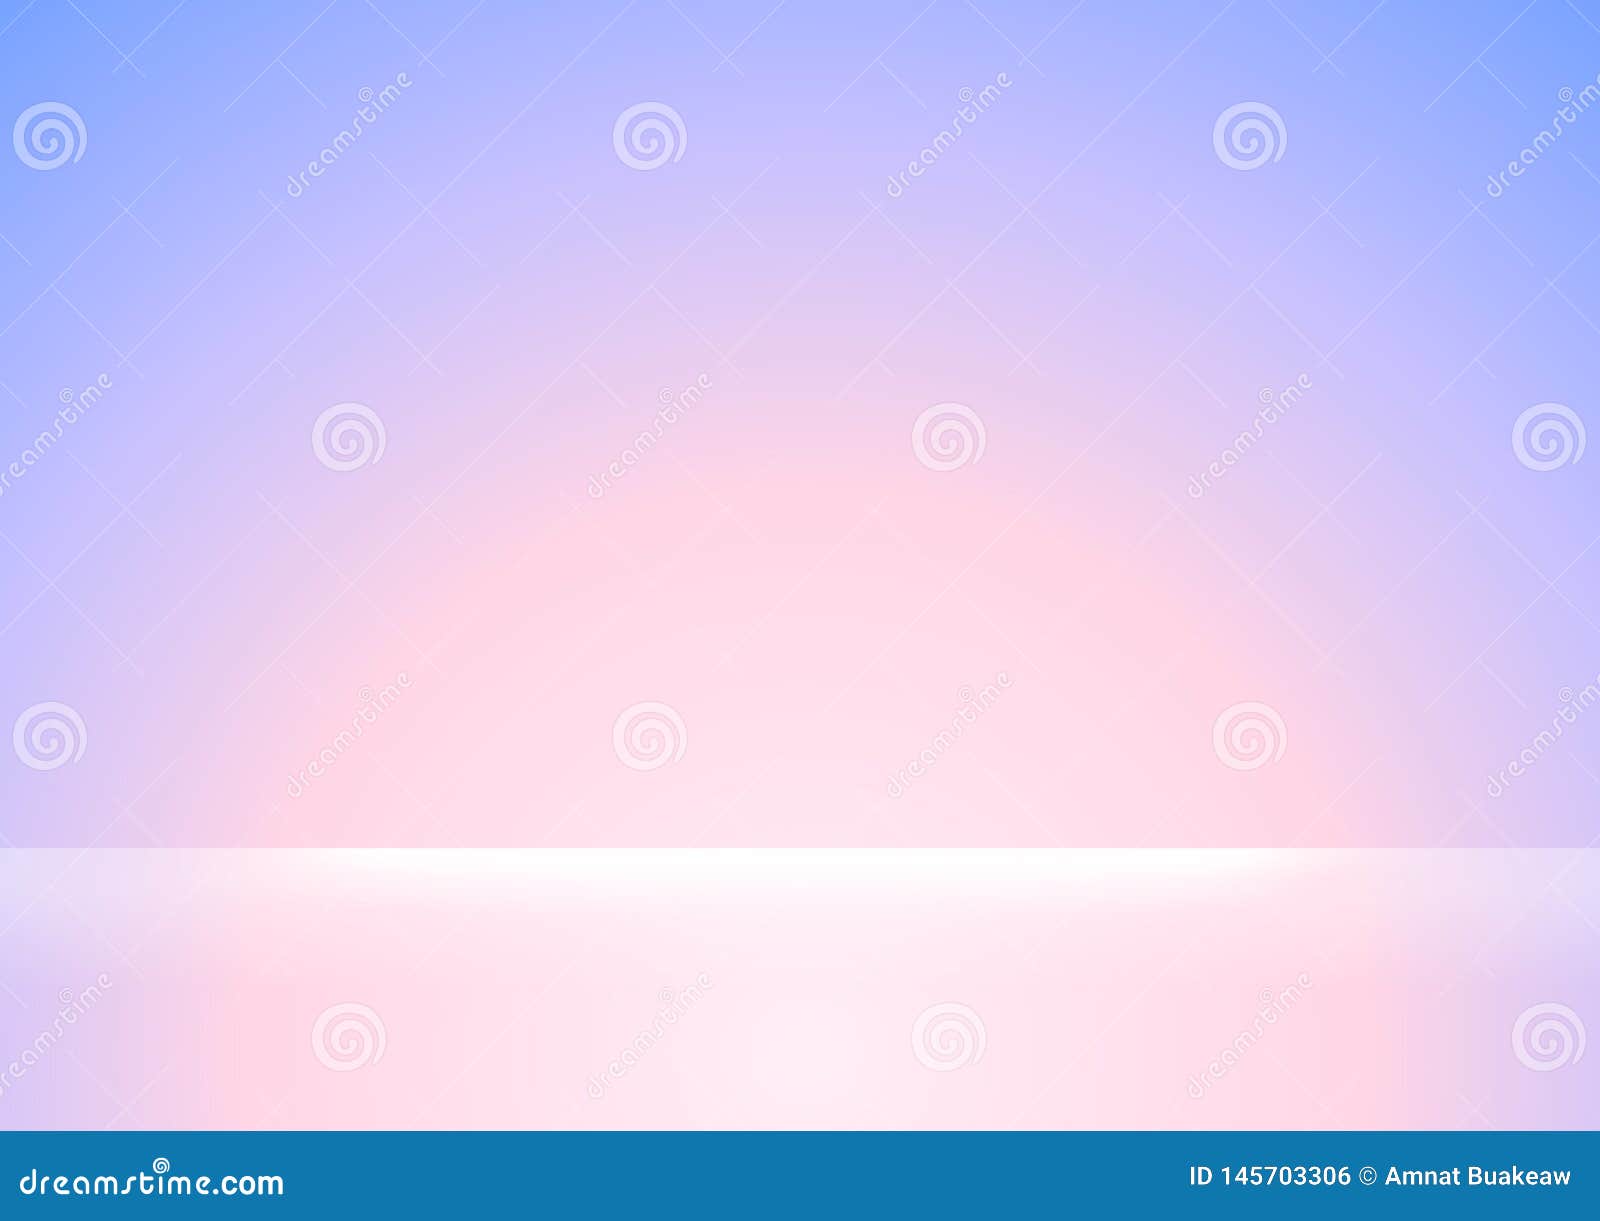 Purple Gradient Pastel Colors Soft and White Light Shine for Background,  Purple and White Soft Colors Gradient Wallpaper, Purple Stock Vector -  Illustration of backdrop, artistic: 145703306